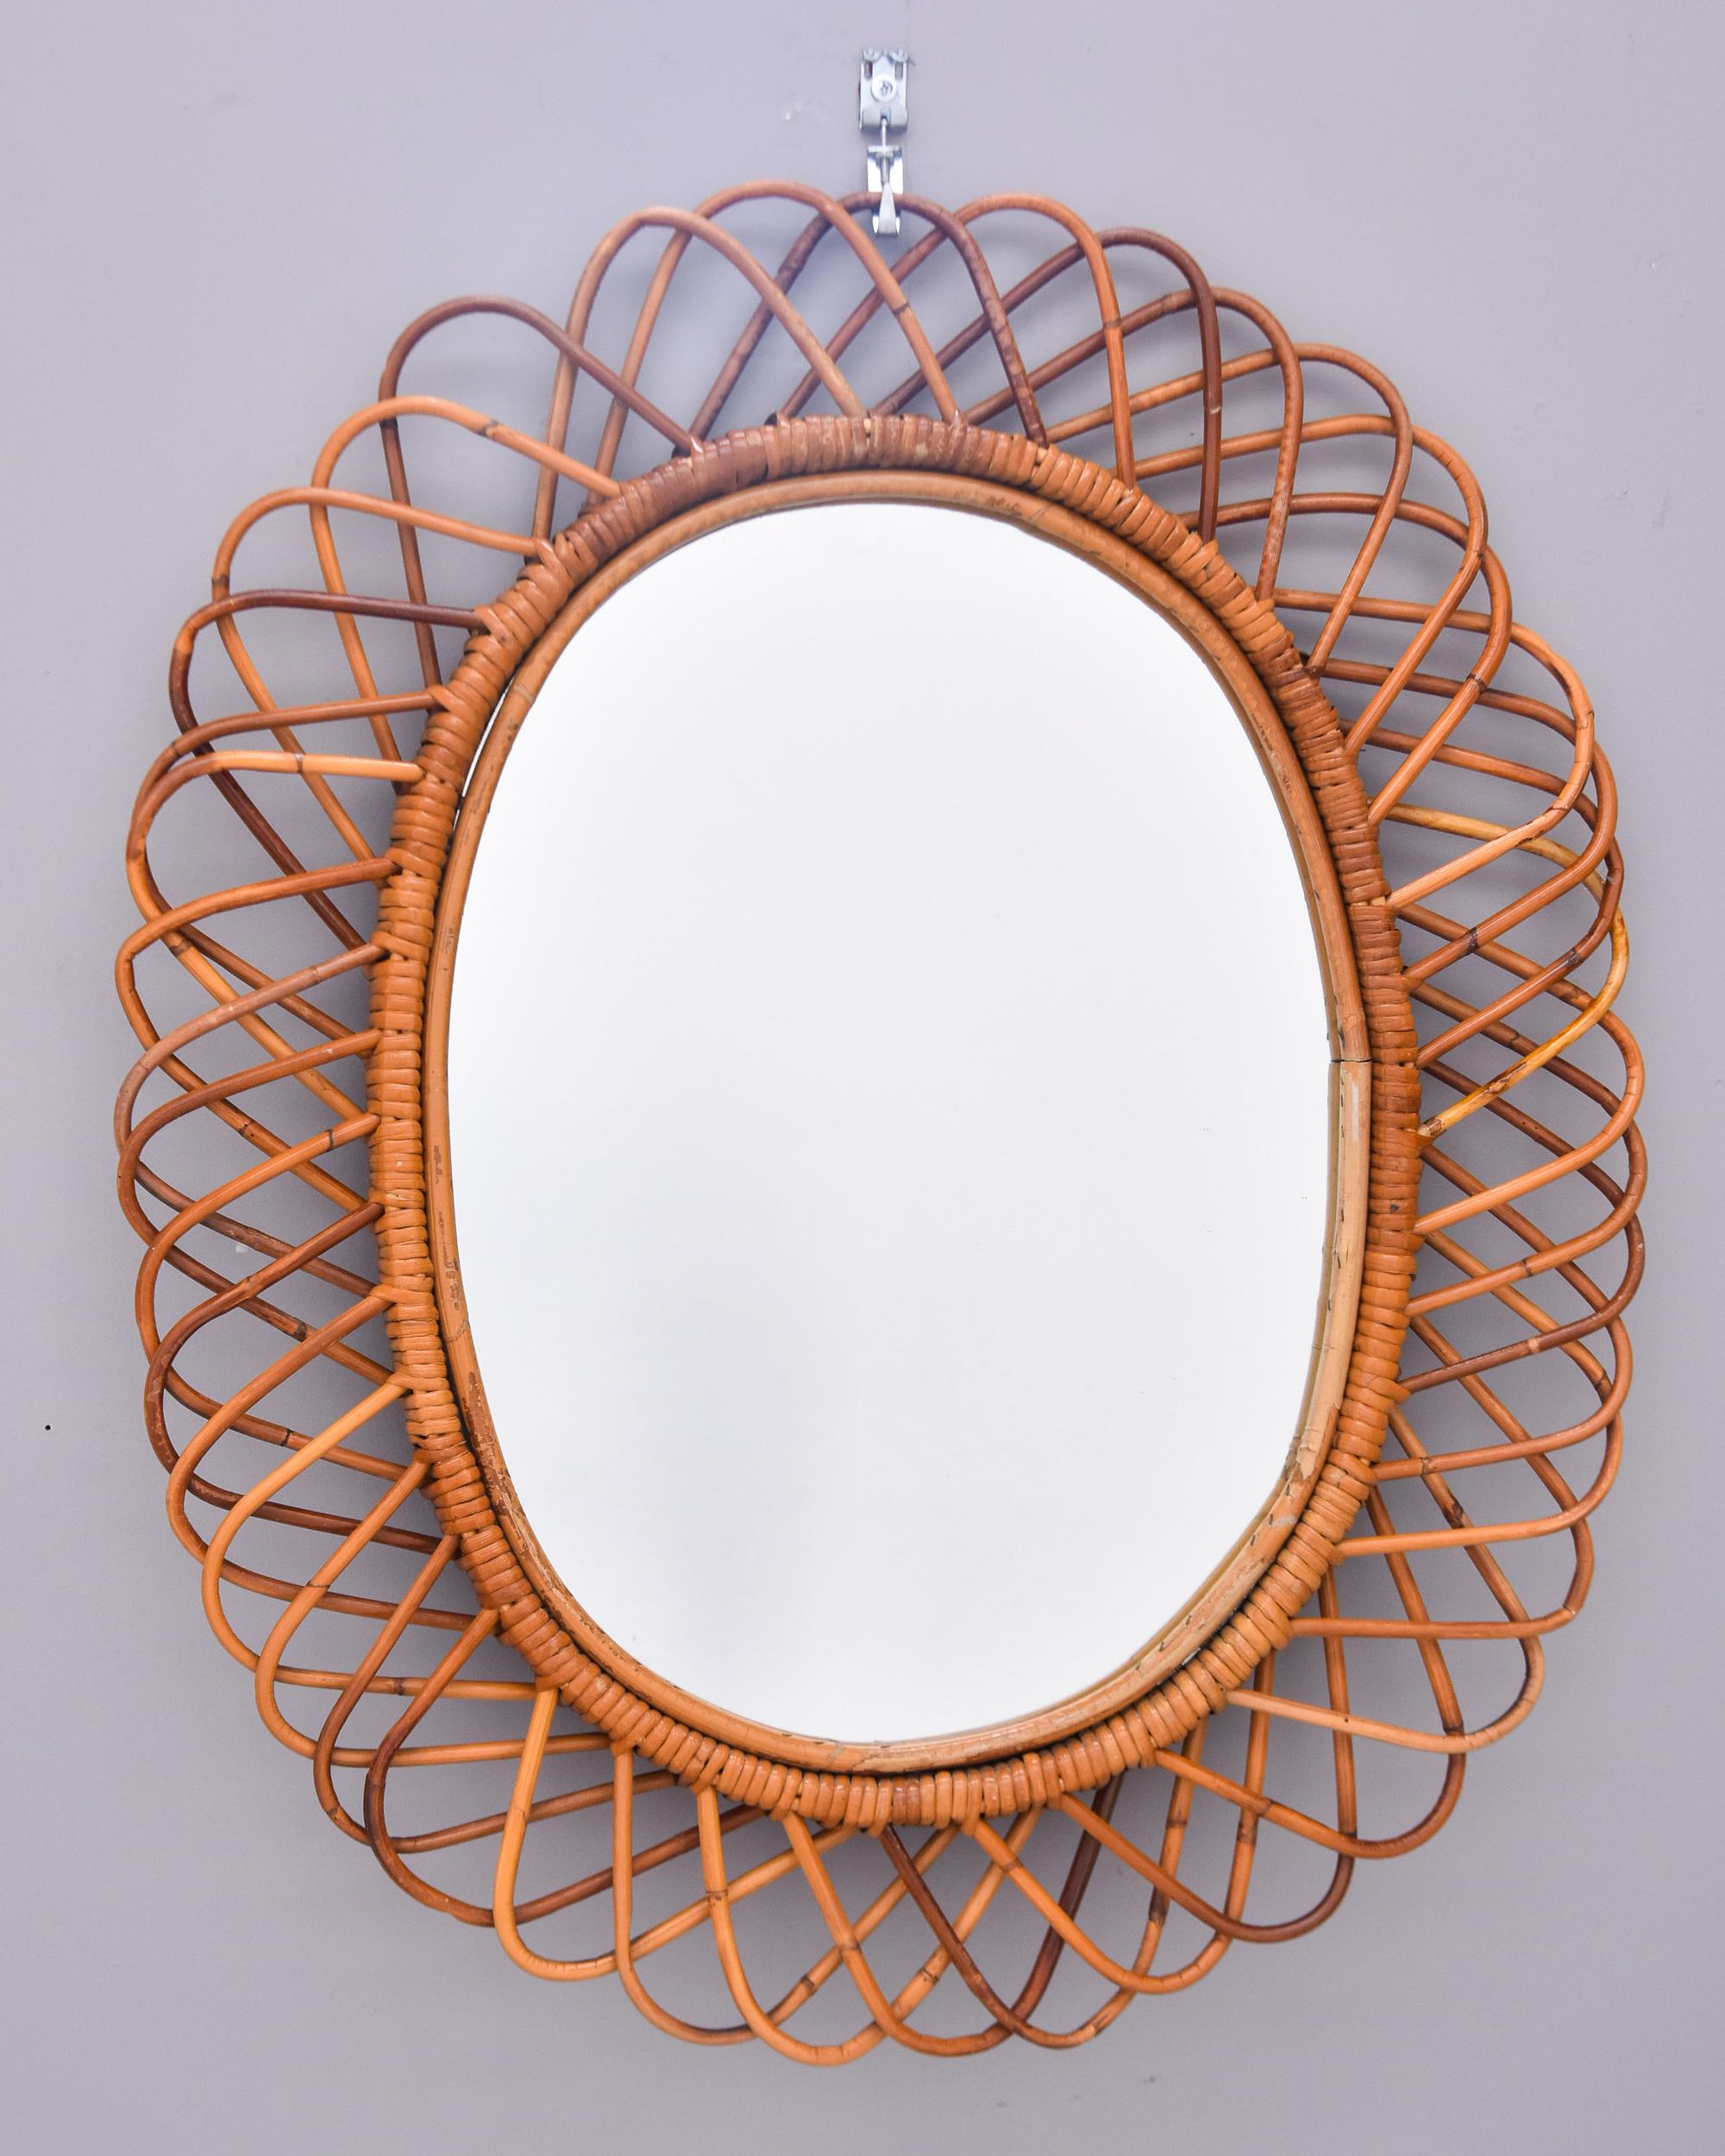 Italian Midcentury Oval Mirror with Woven Rattan or Wicker Frame